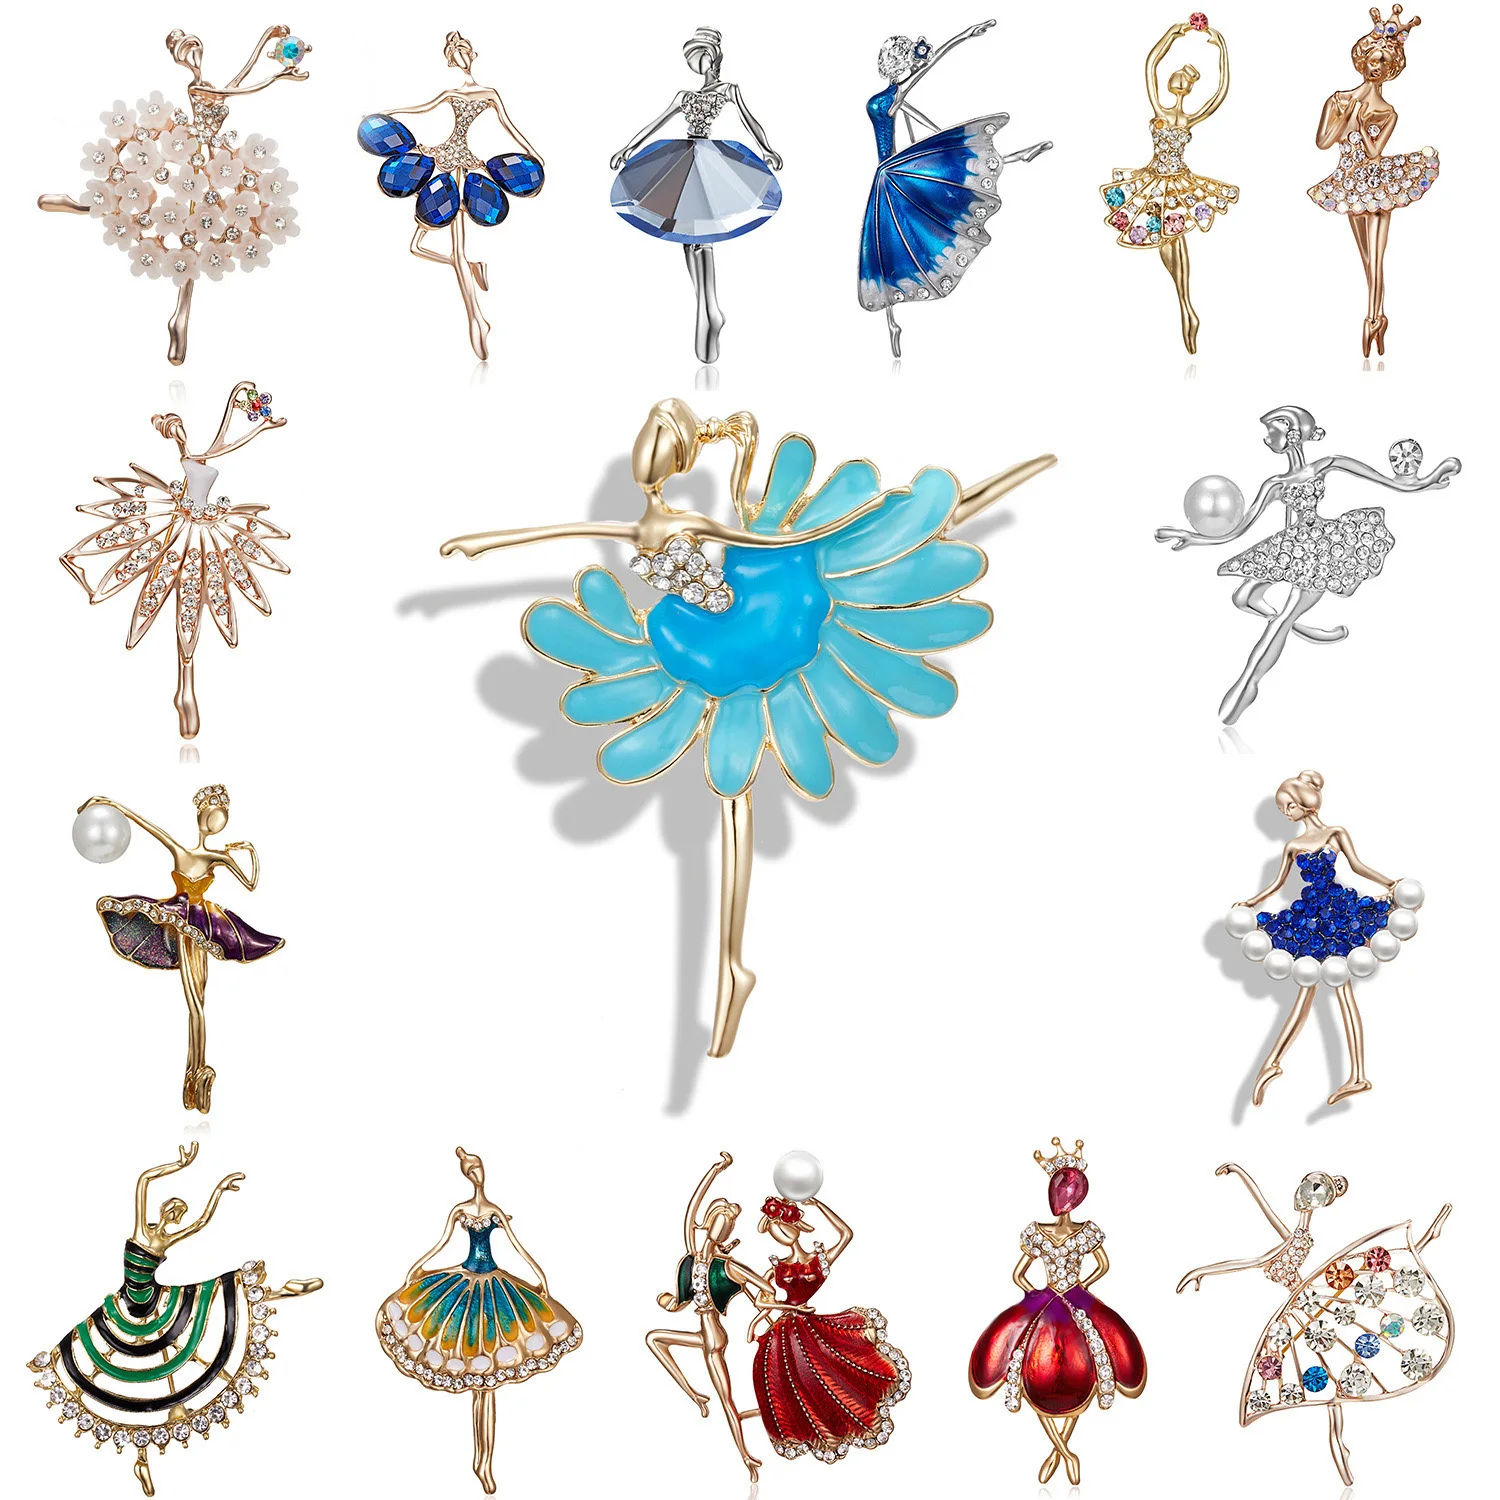 SKEDS Exquisite Crystal Ballet Dancer Brooches Jewelry Pins For Lady Elegant Women's Brooch Pin Decorative Suit Clothing Badges